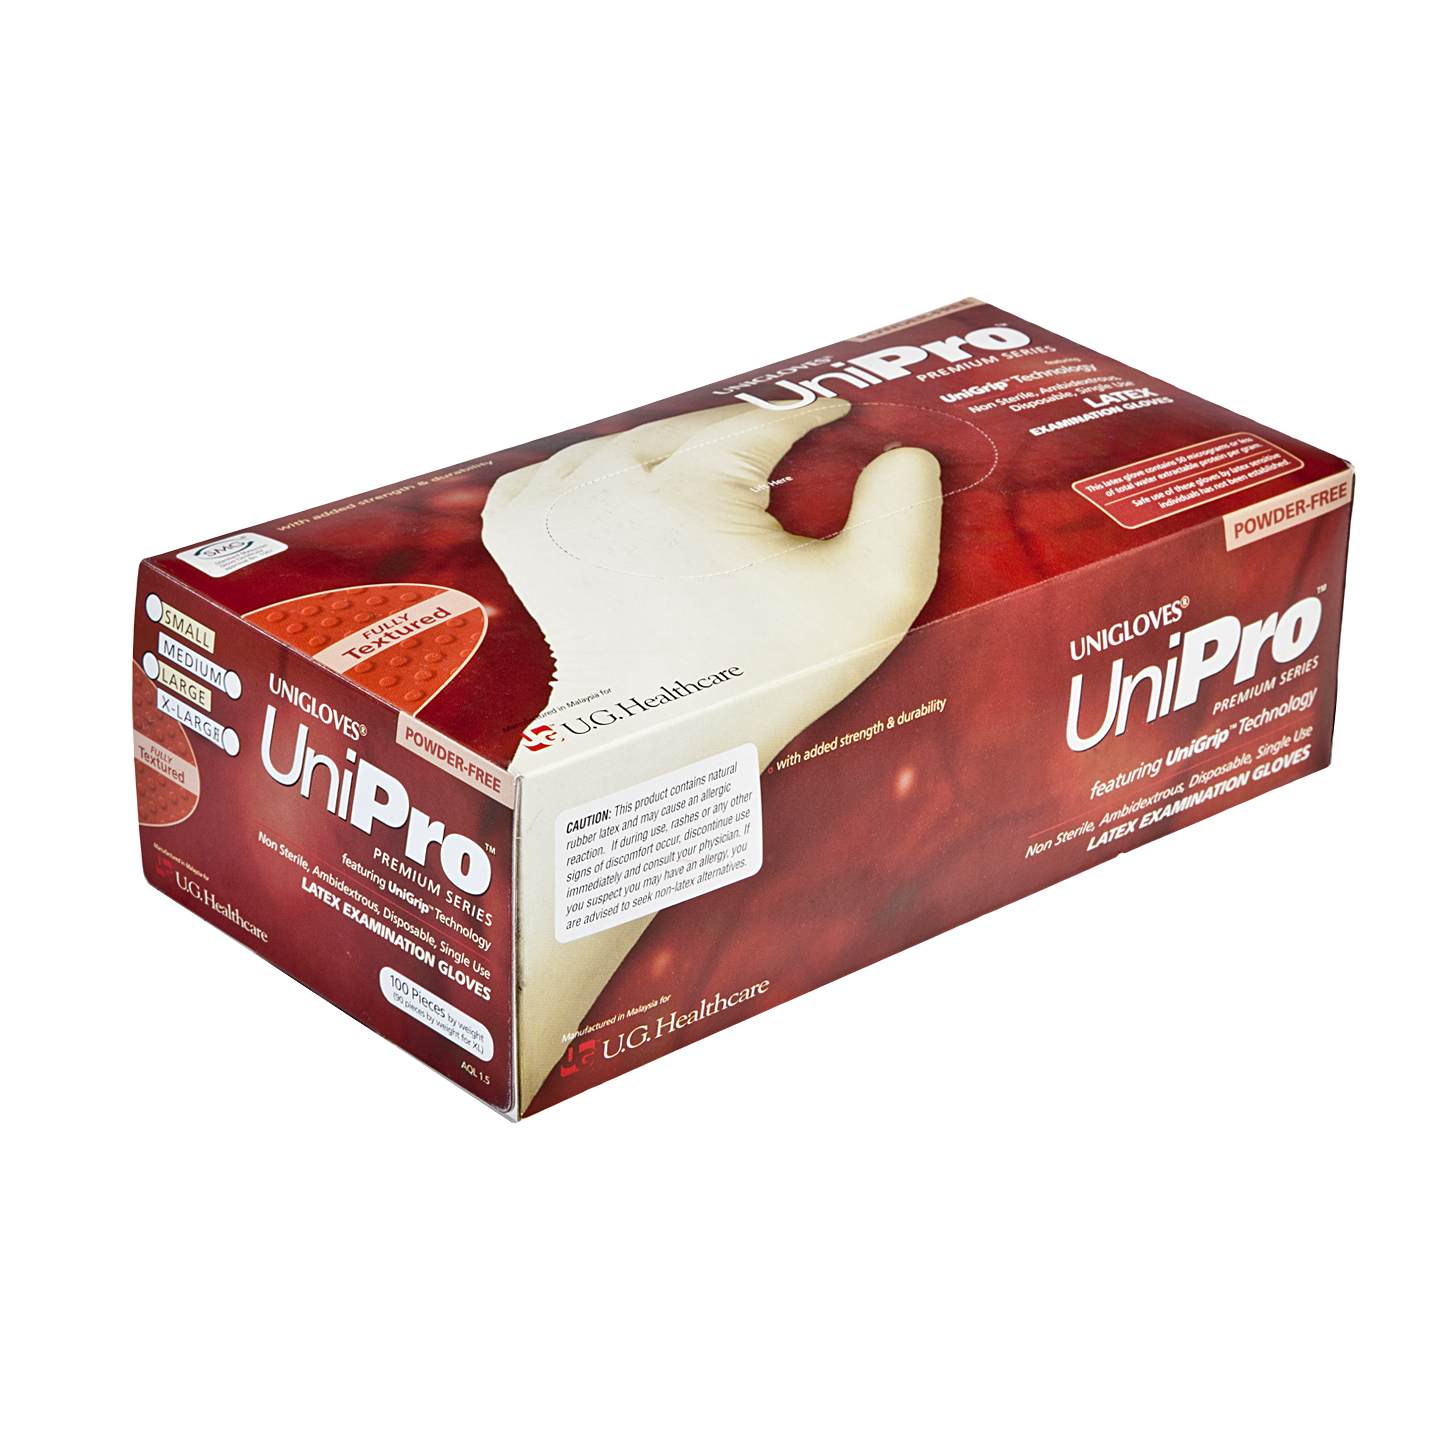 Unipro Latex Disposable Gloves-Box of 100 Gloves